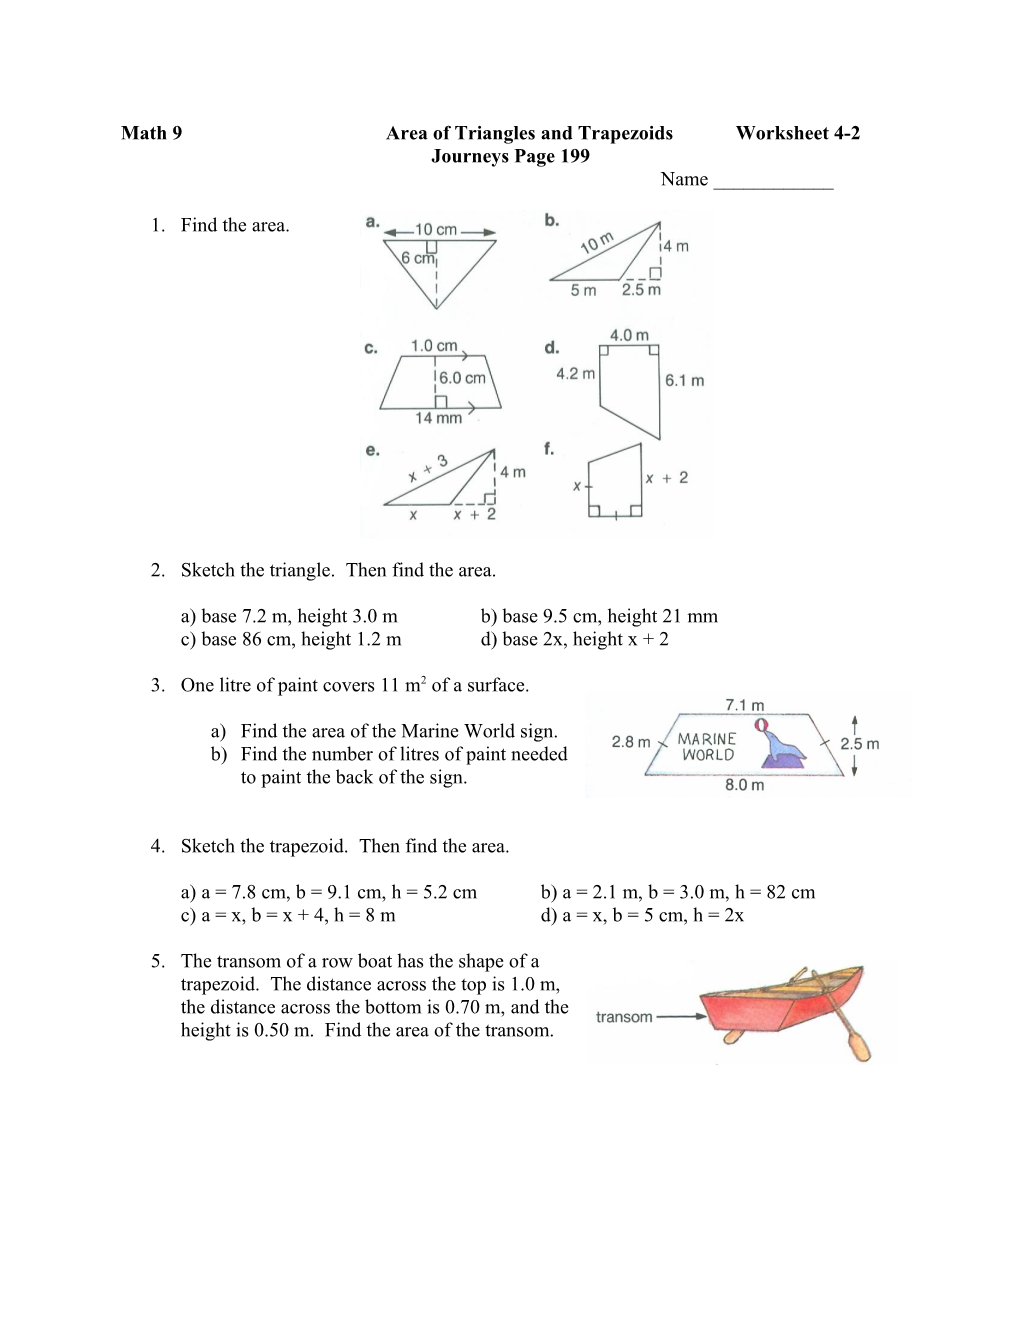 Math 9 Area of Triangles and Trapezoids Worksheet 4-2